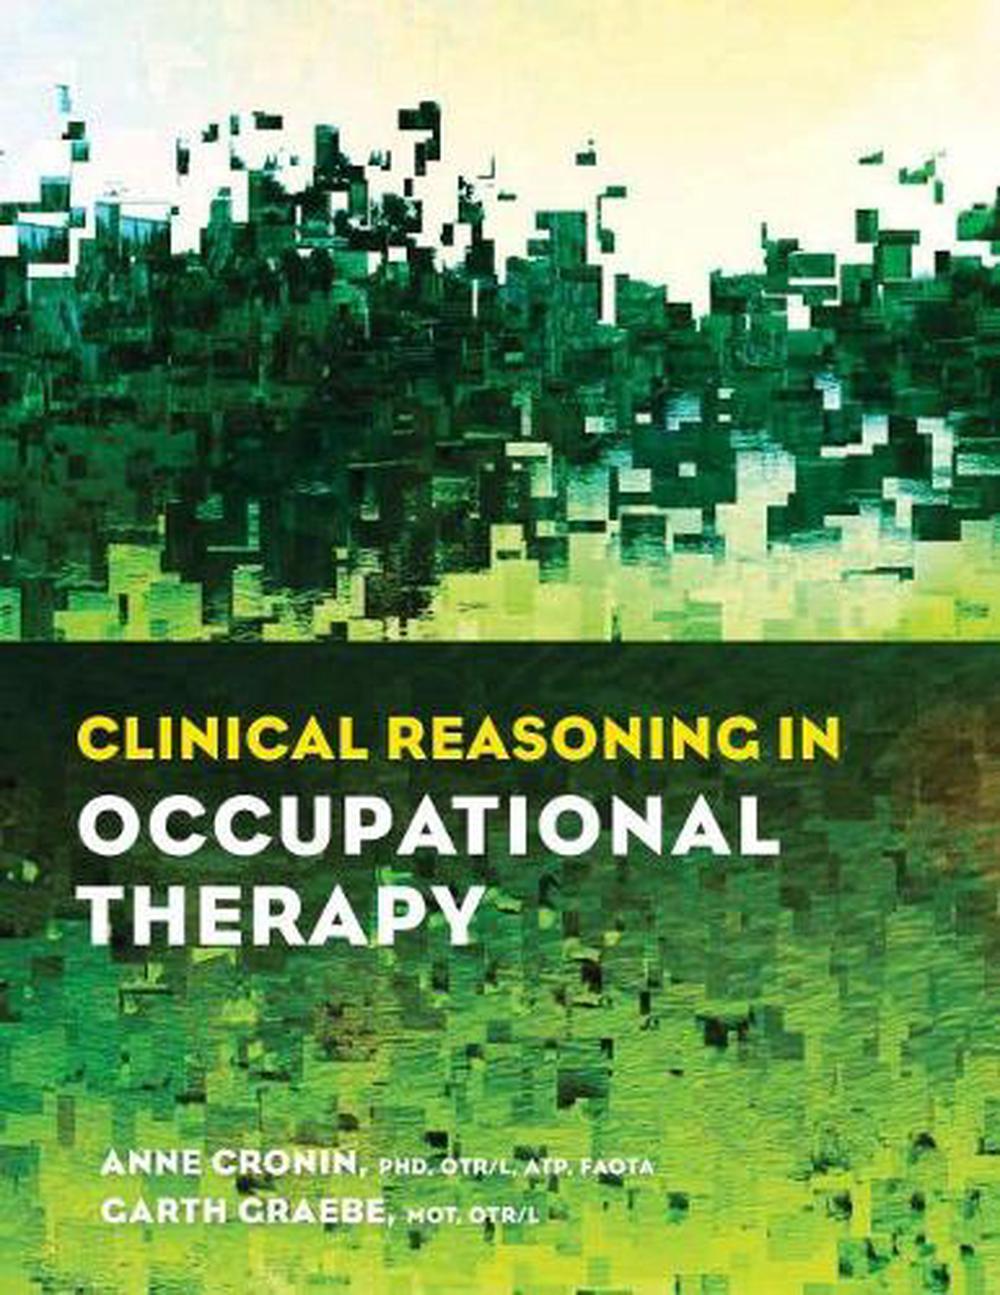 clinical reasoning case study examples occupational therapy